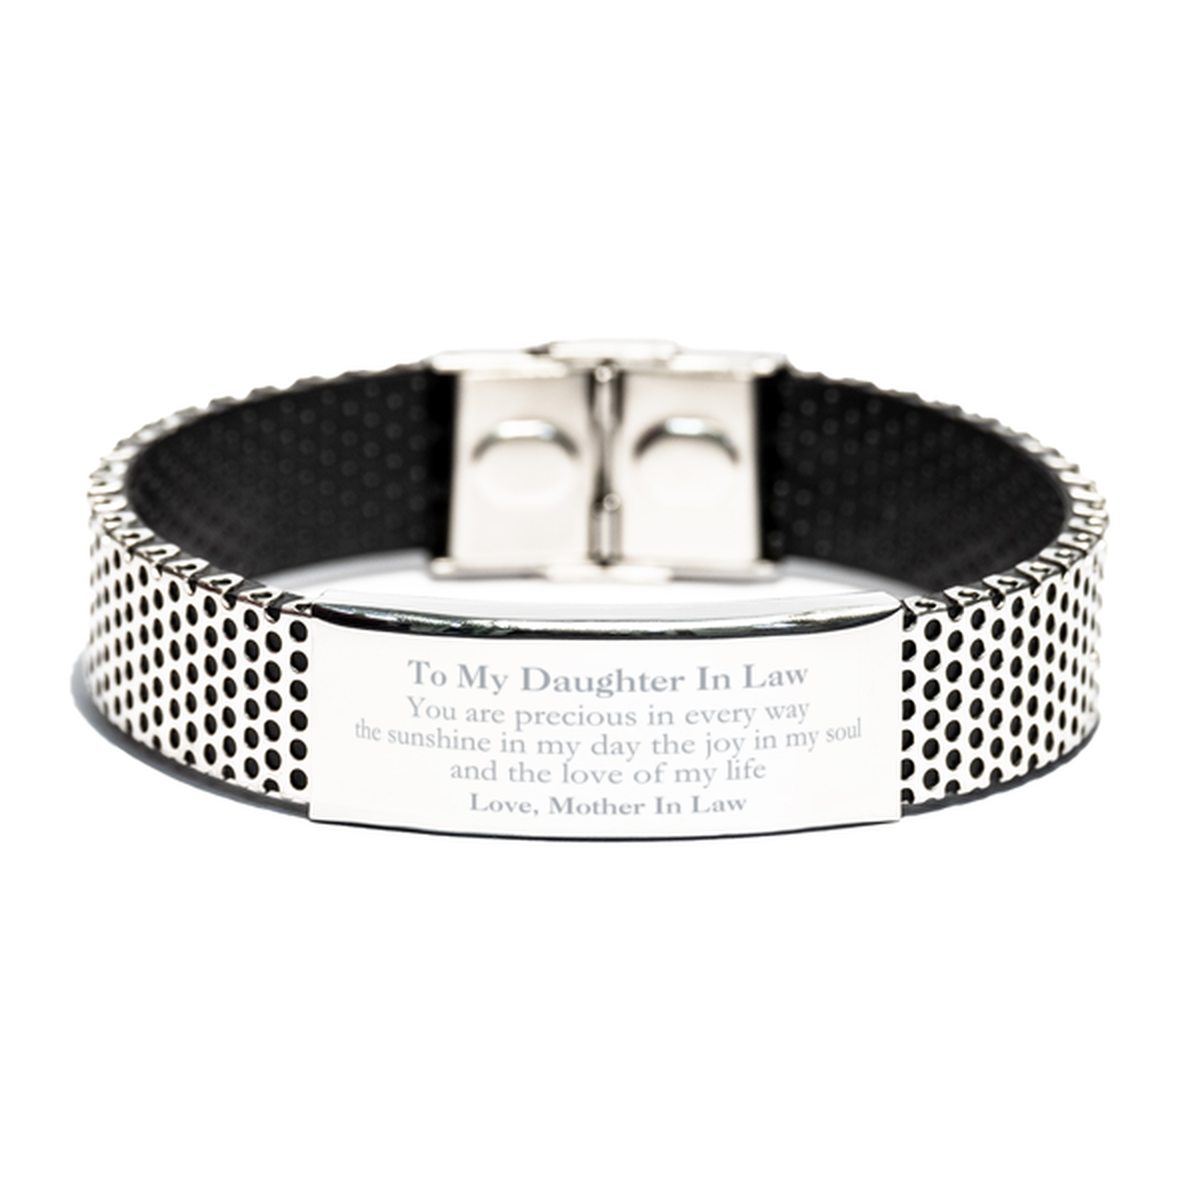 Graduation Gifts for Daughter In Law Stainless Steel Bracelet Present from Mother In Law, Christmas Daughter In Law Birthday Gifts Daughter In Law You are precious in every way the sunshine in my day. Love, Mother In Law